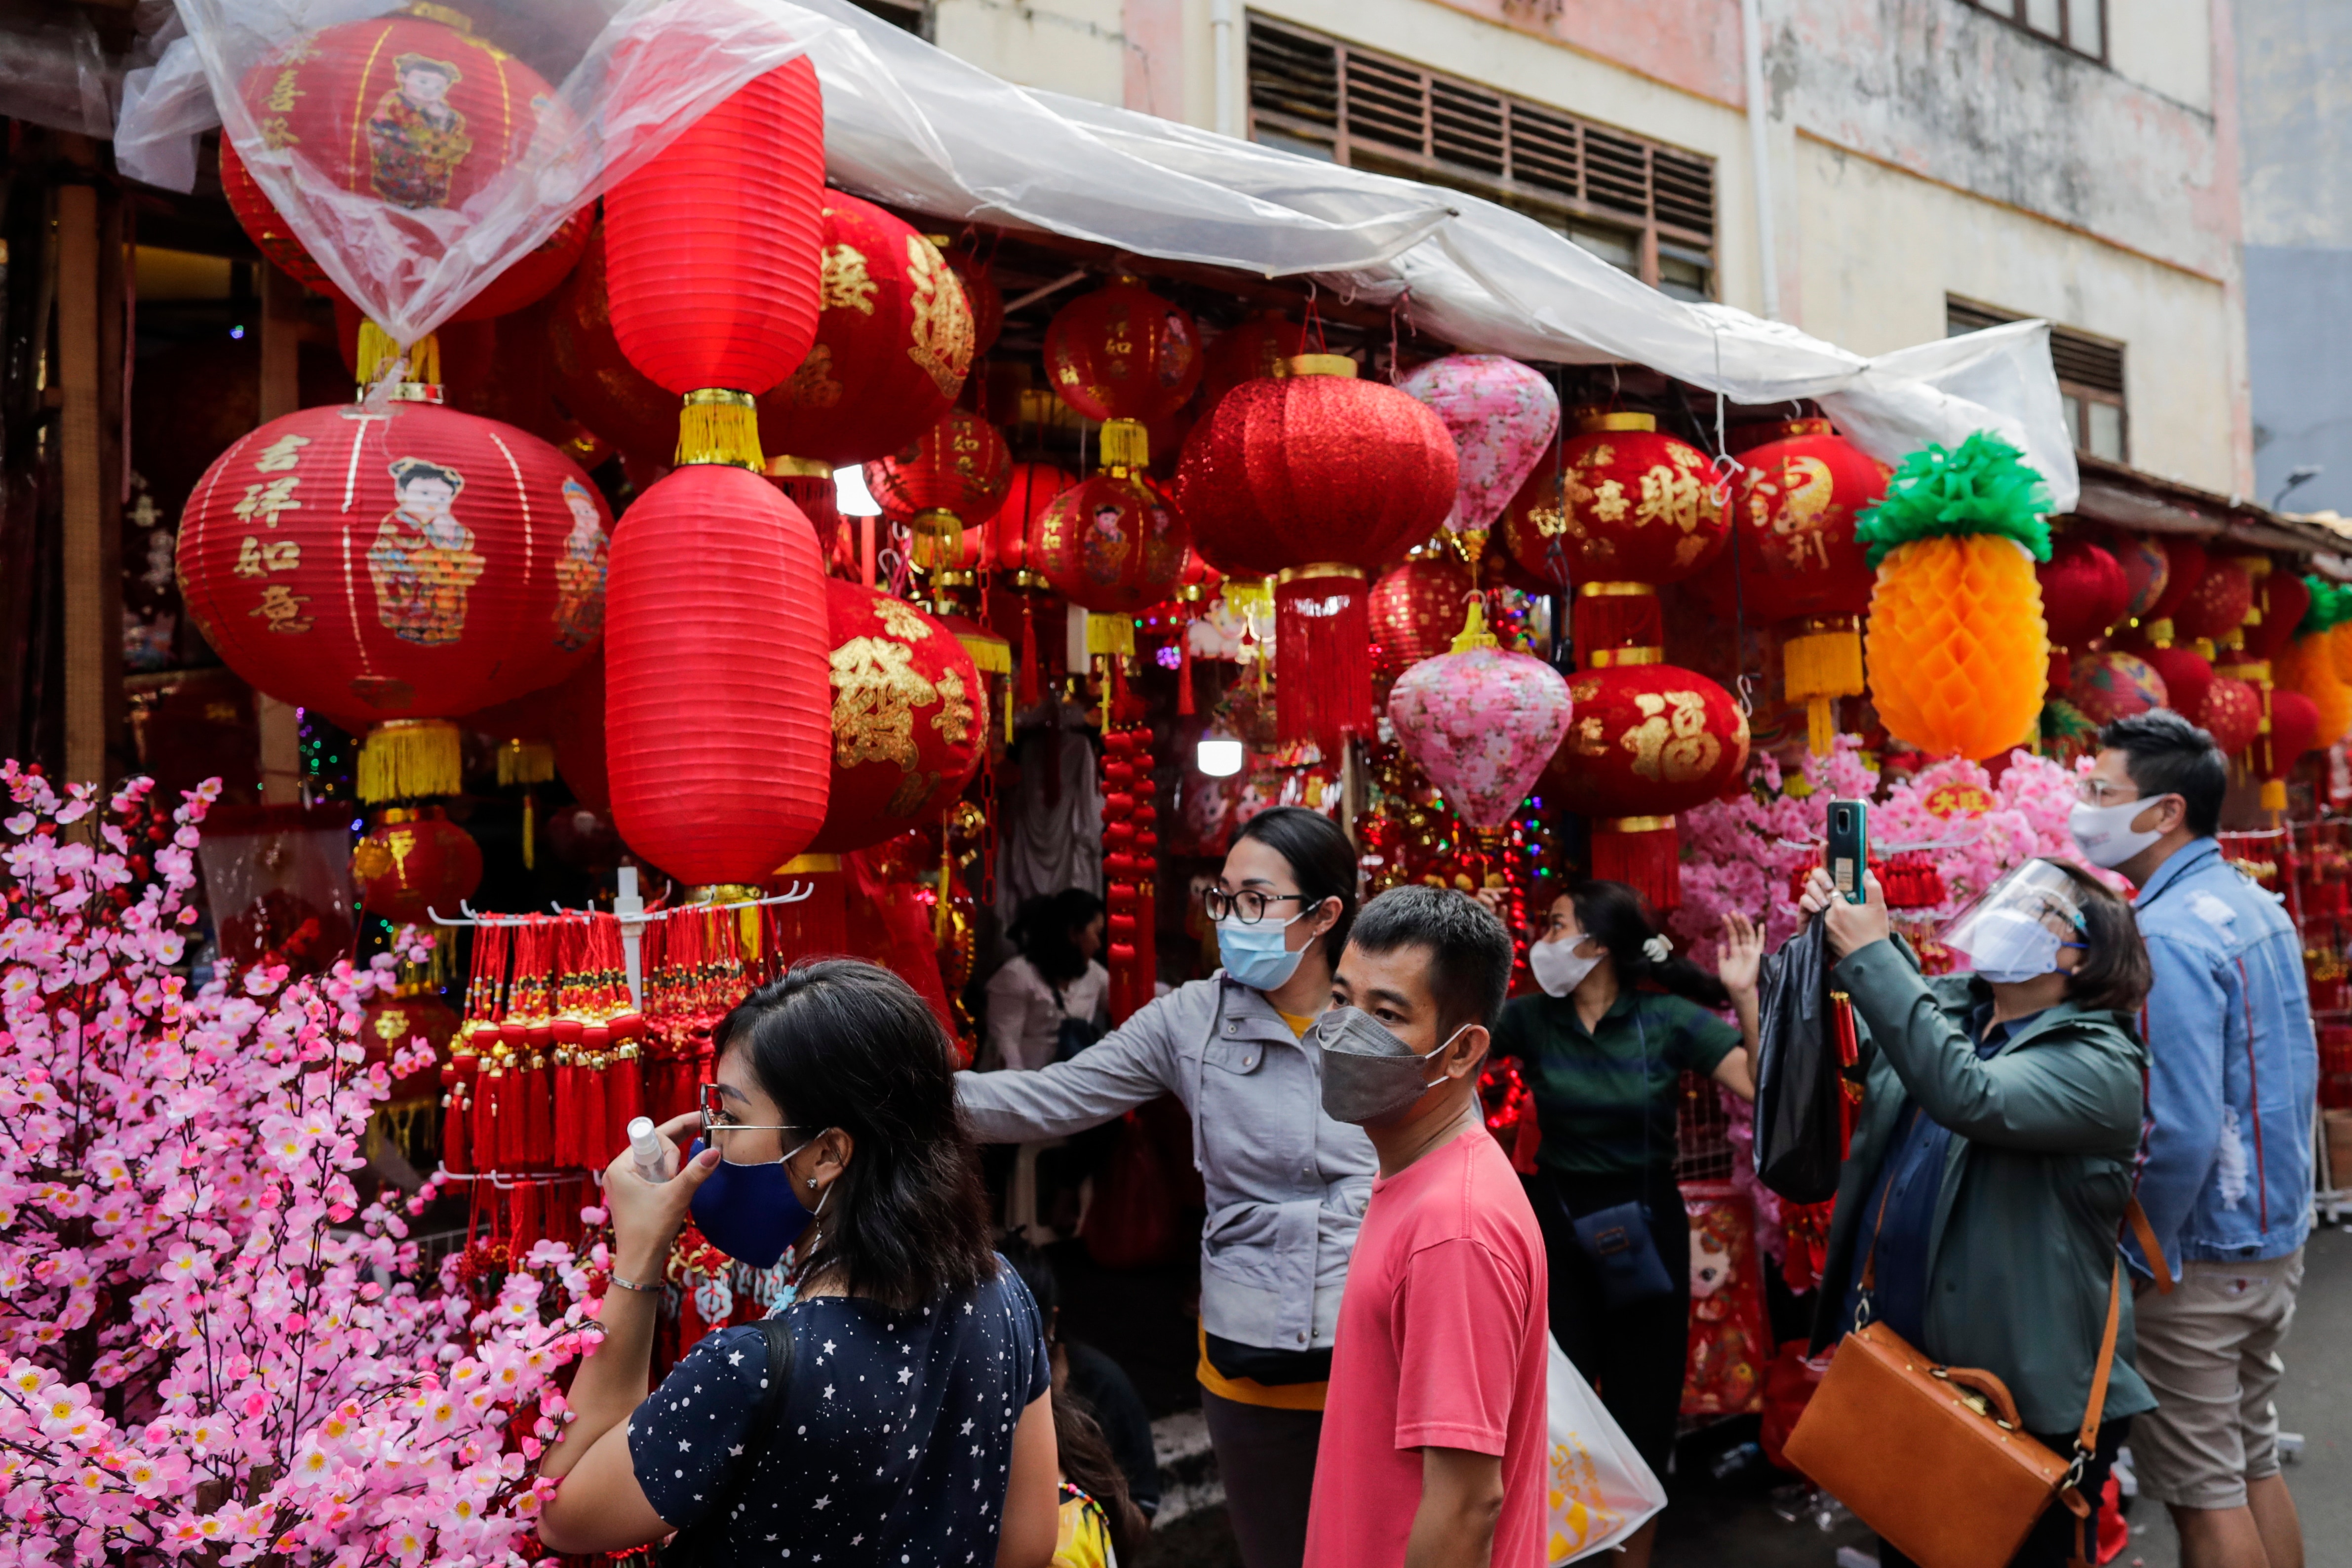 Customers shop for decorations for the upcoming Chinese Lunar New Year at a street side stall in Jakarta, Indonesia.